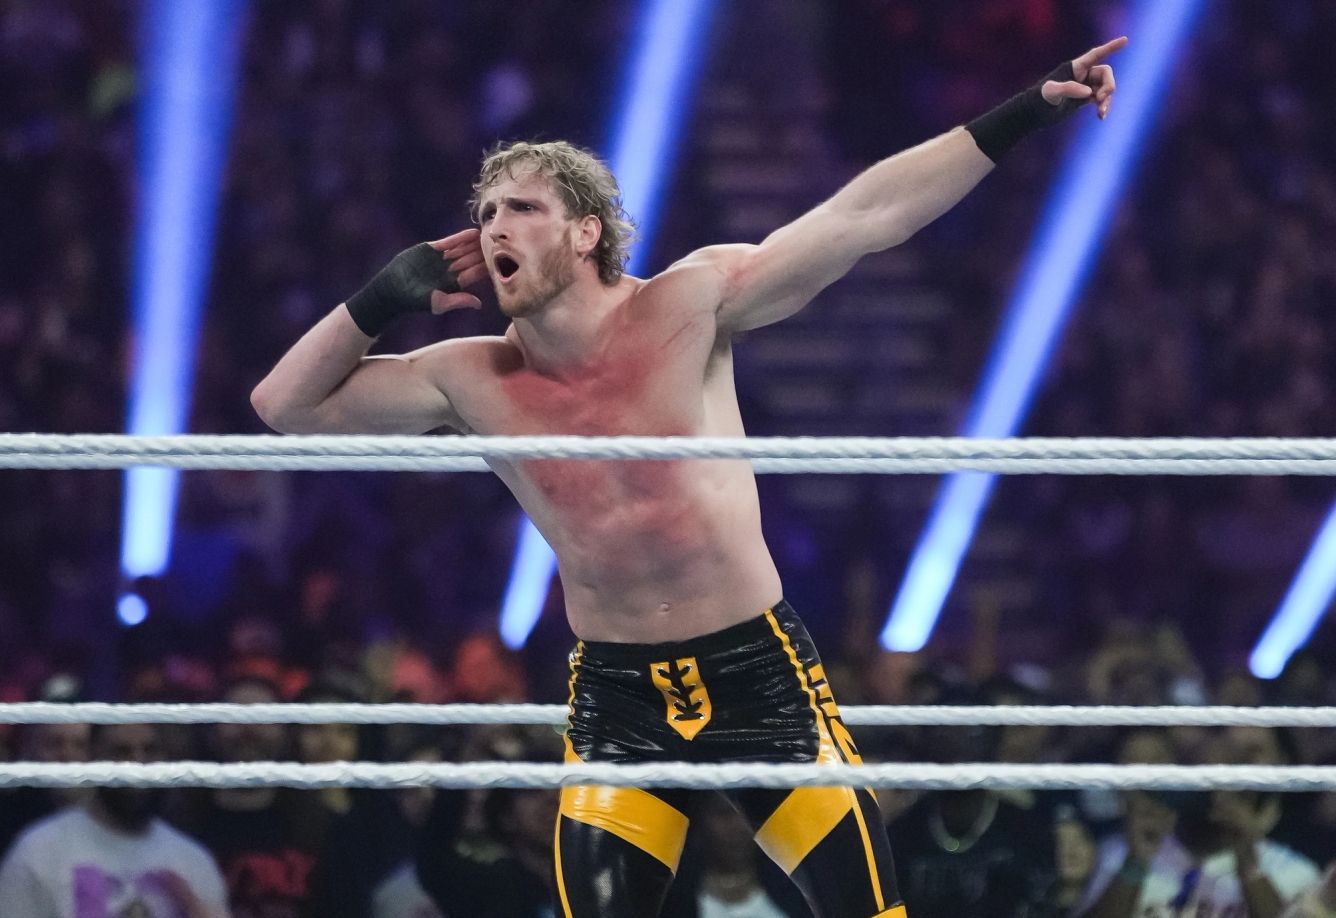 Logan Paul competes in a WWE match.